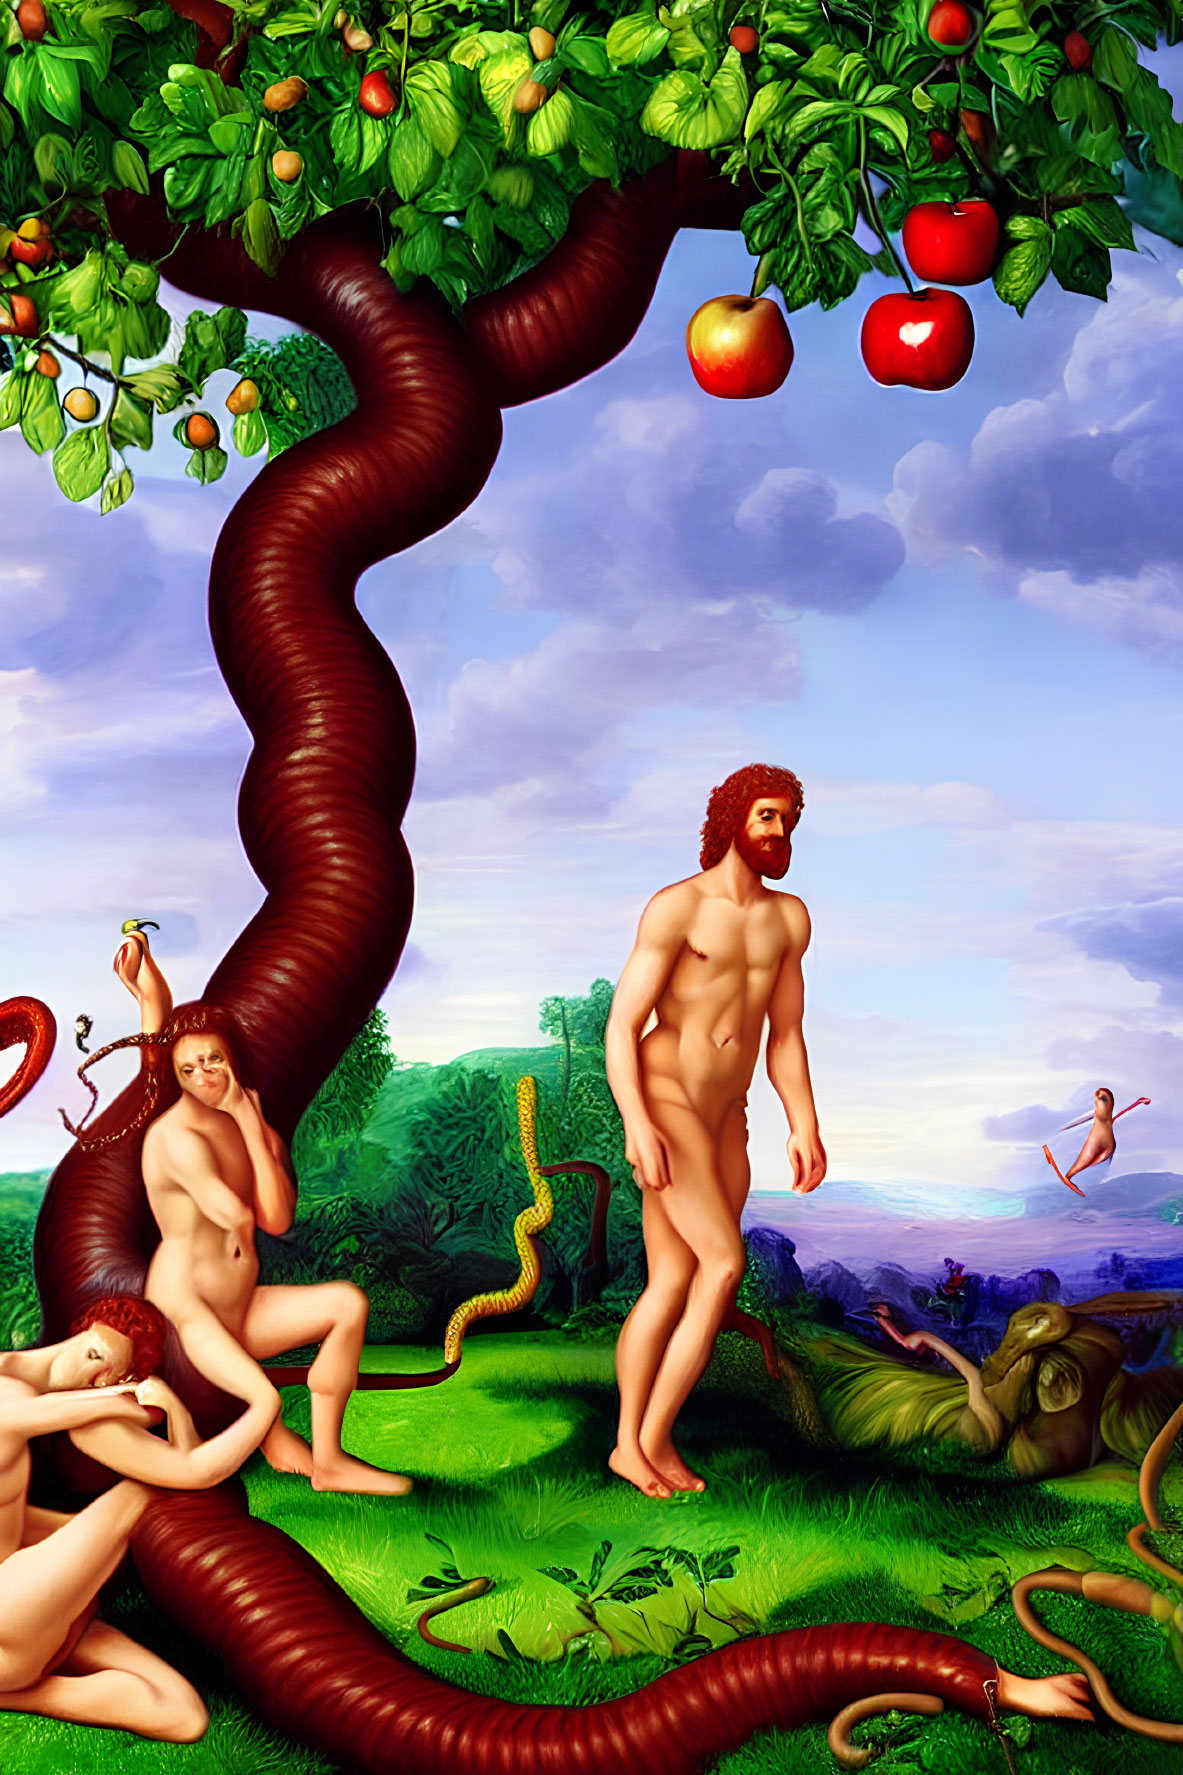 Stylized Garden of Eden scene with serpent, tree, human figures, greenery, and red